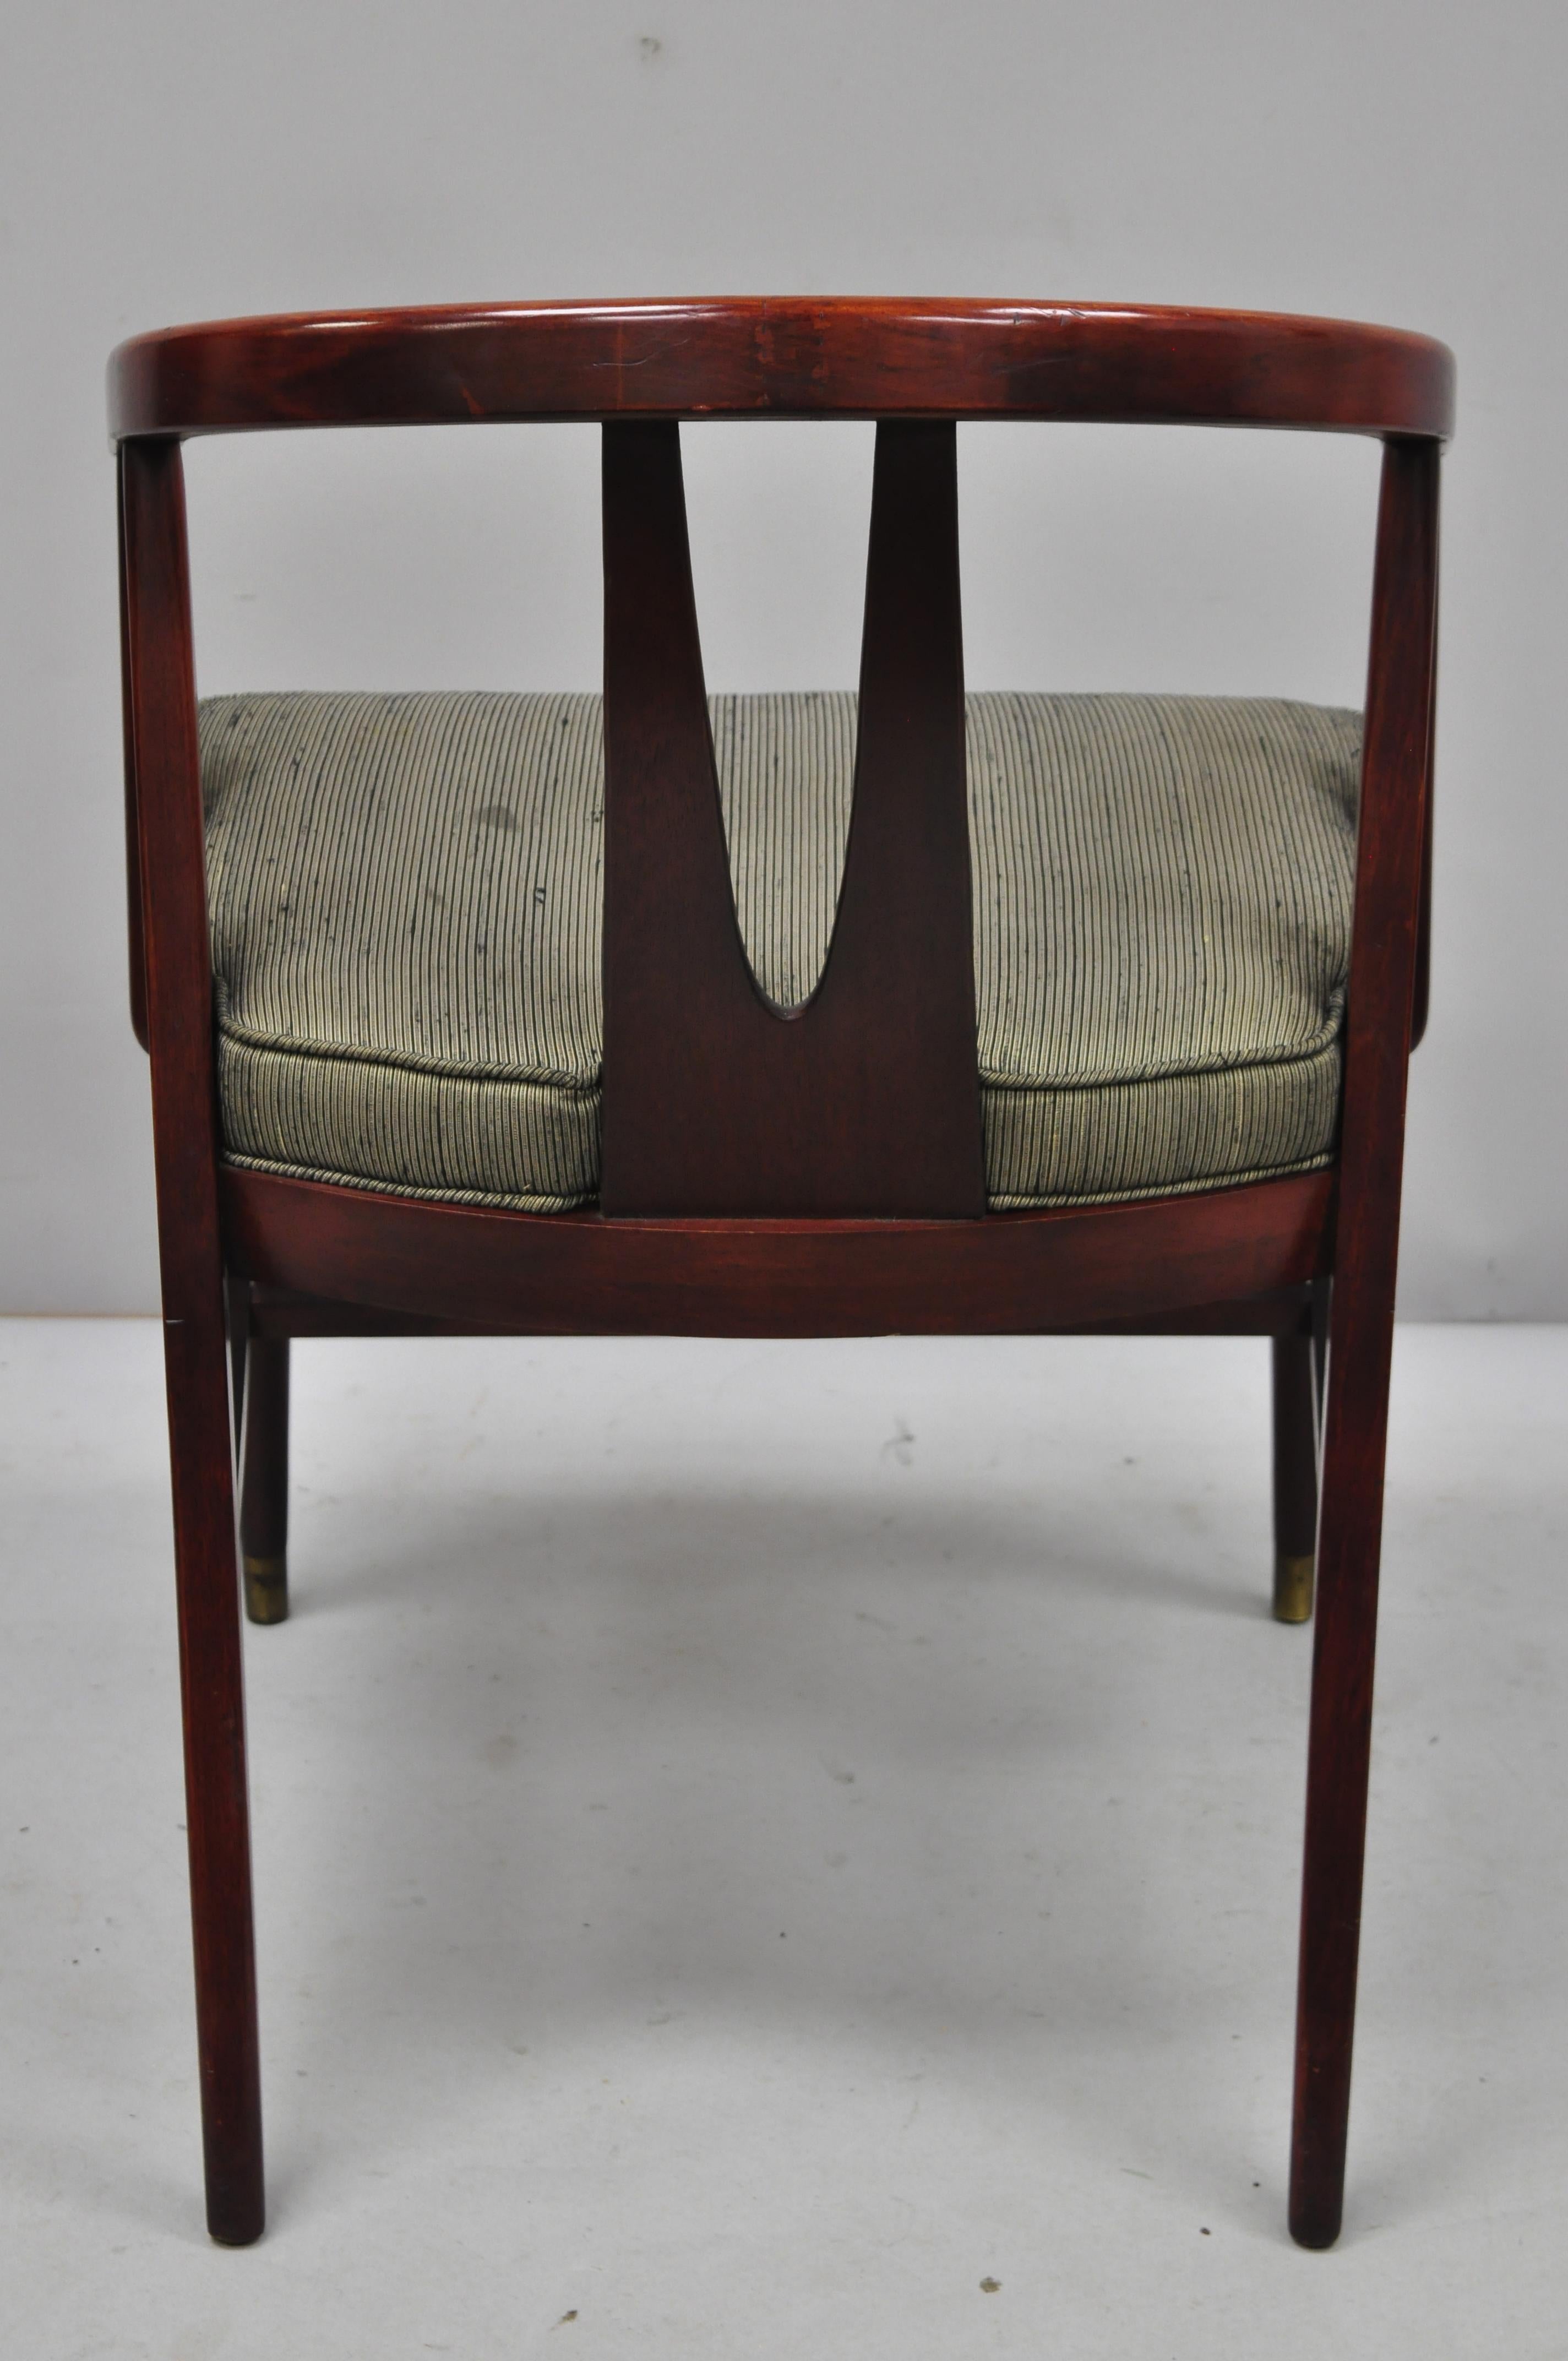 Vintage Mid-Century Modern Horseshoe Curved Back Mahogany Dining Chair A 1